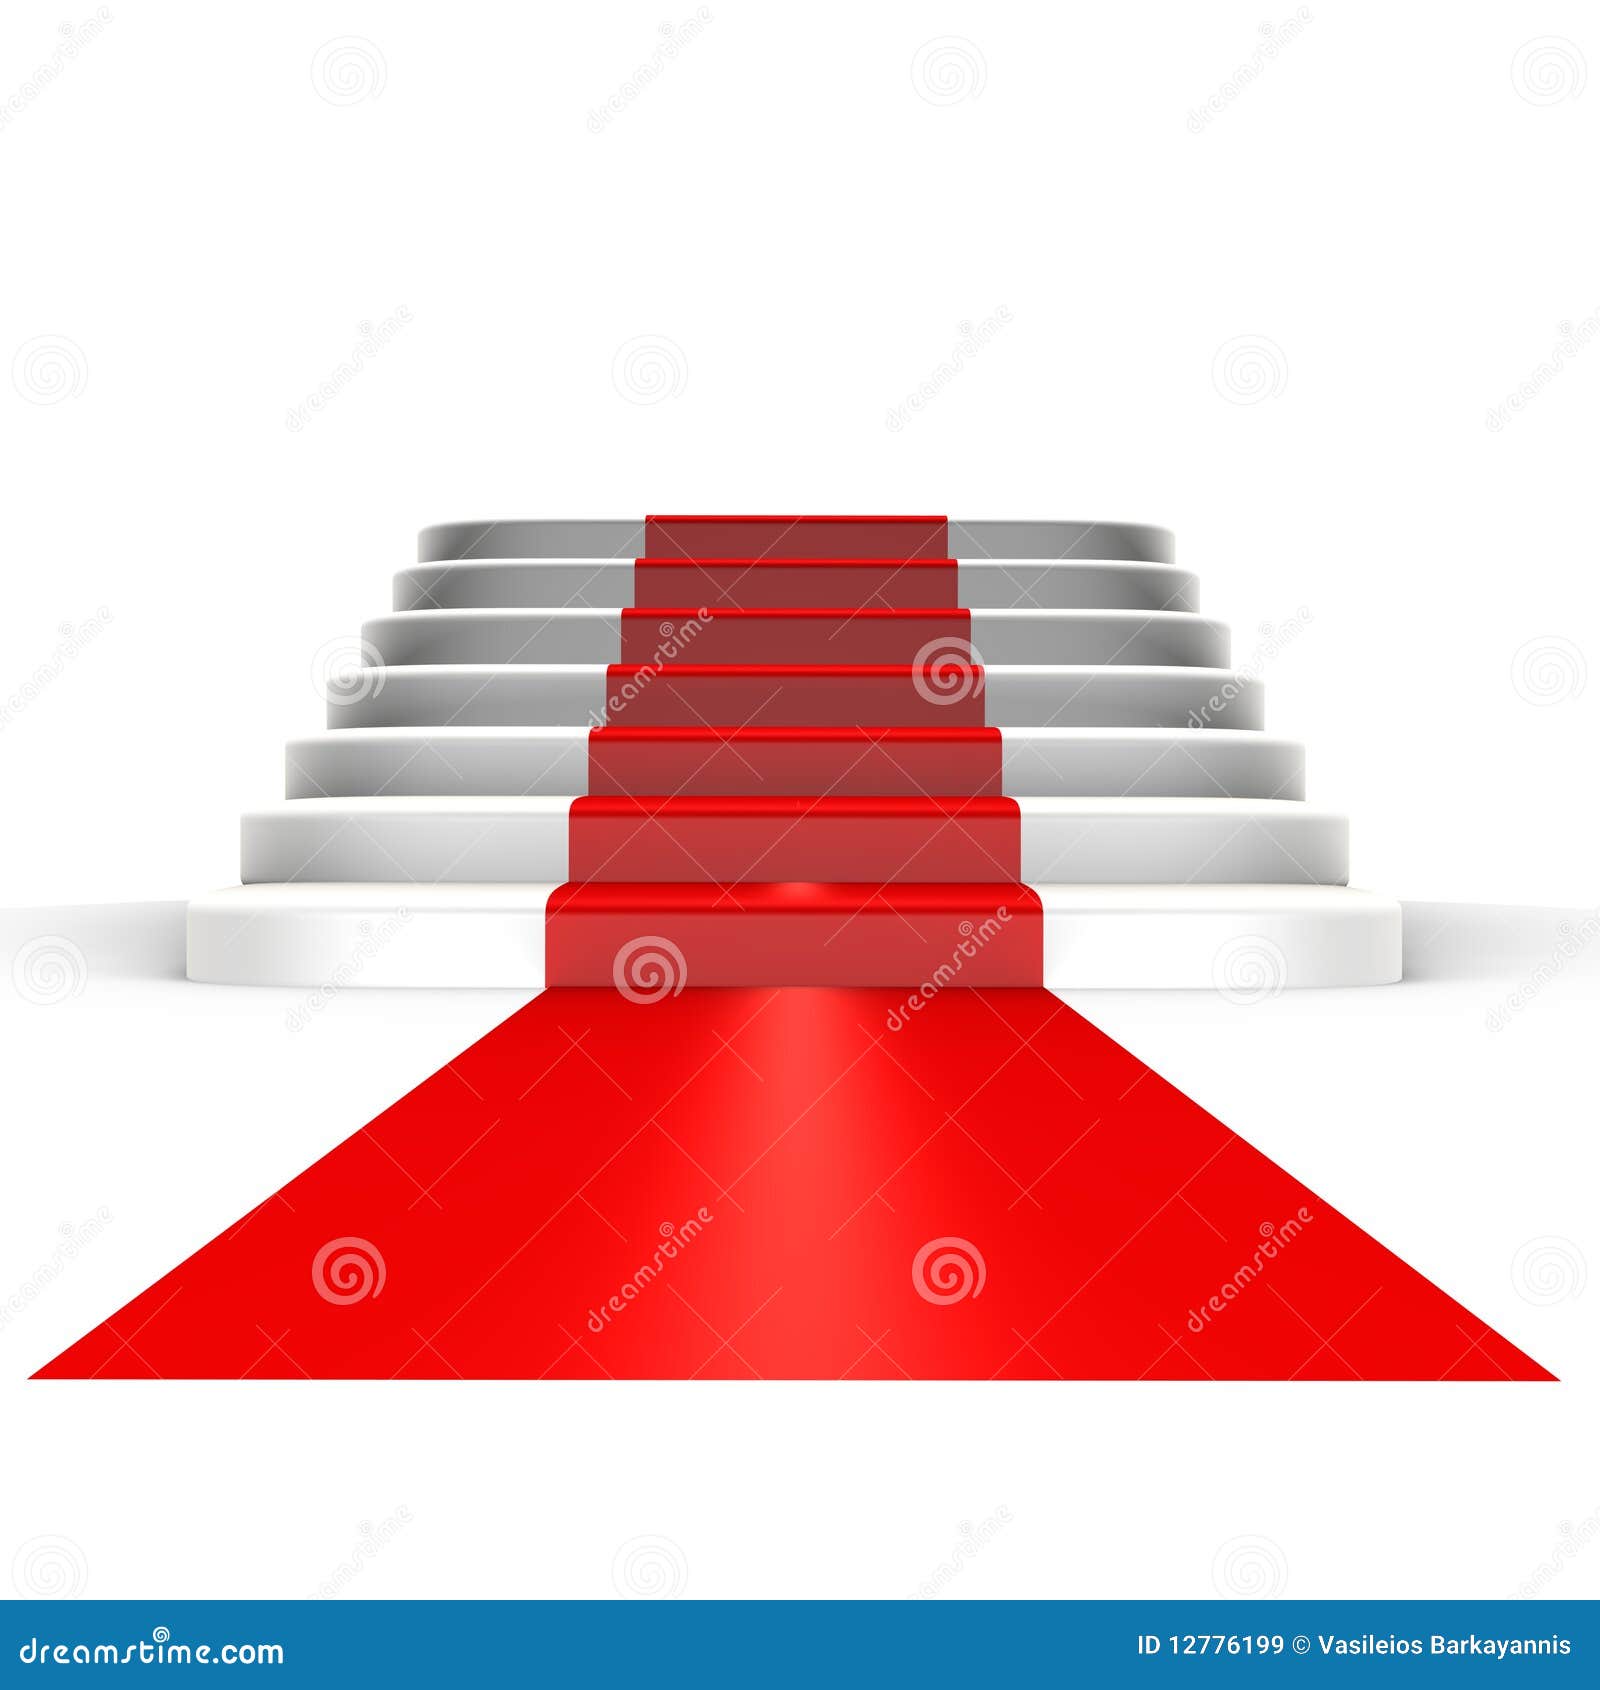 red carpet to fame - a 3d image